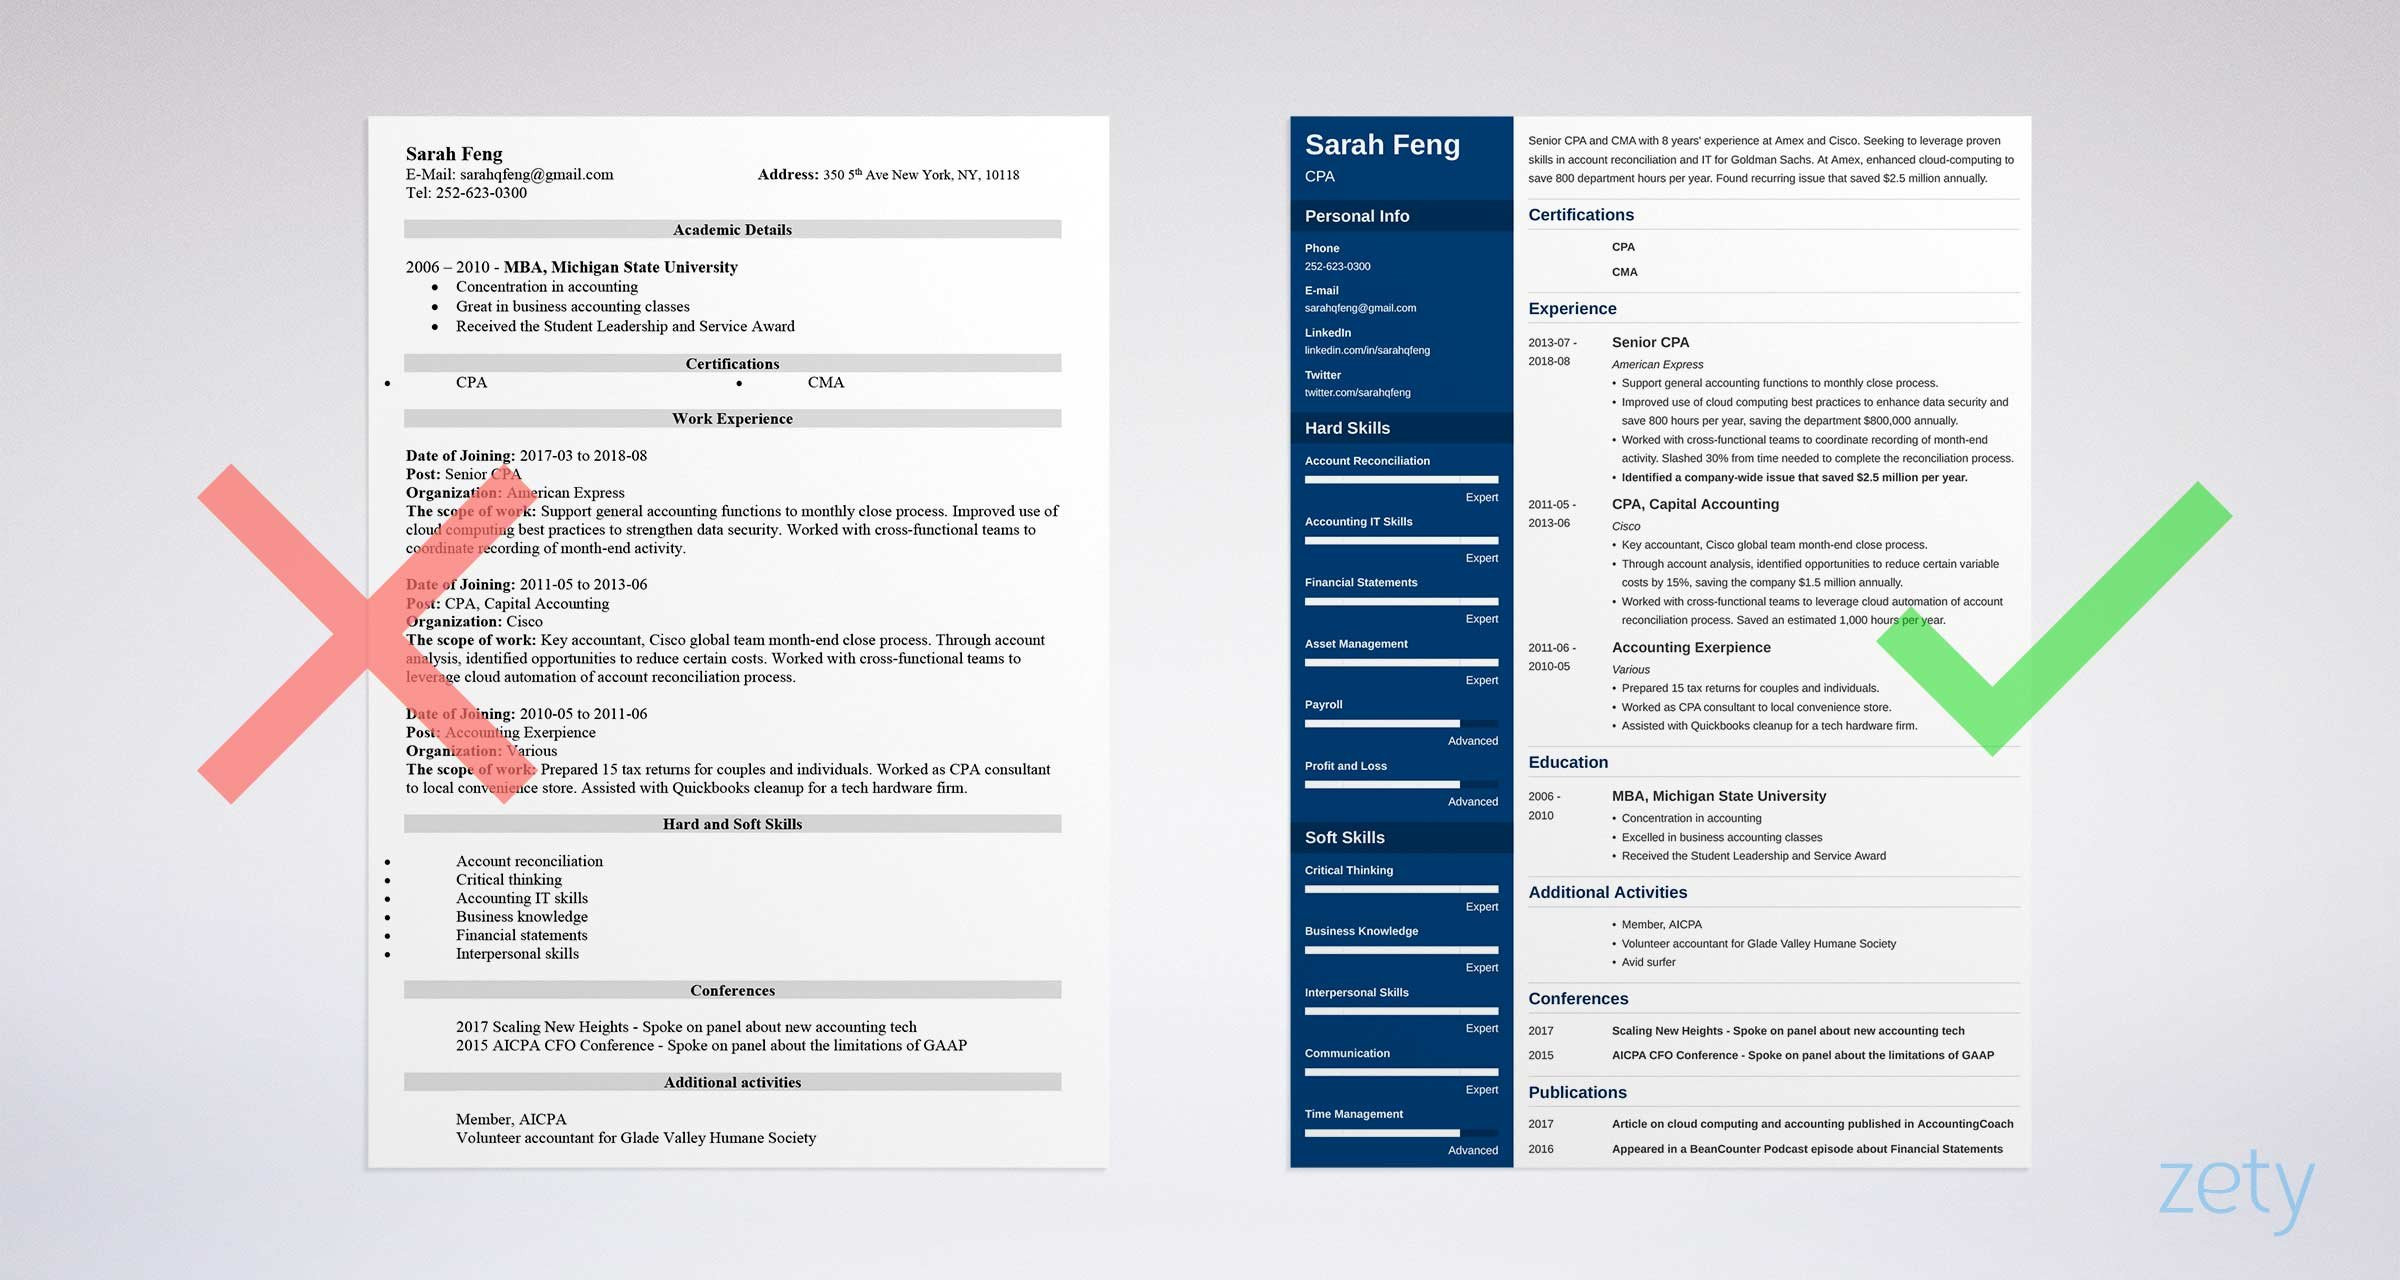 Ojt Resume Sample for Accounting Student Accounting Resume: Examples for An Accountant [lancarrezekiqtemplate]